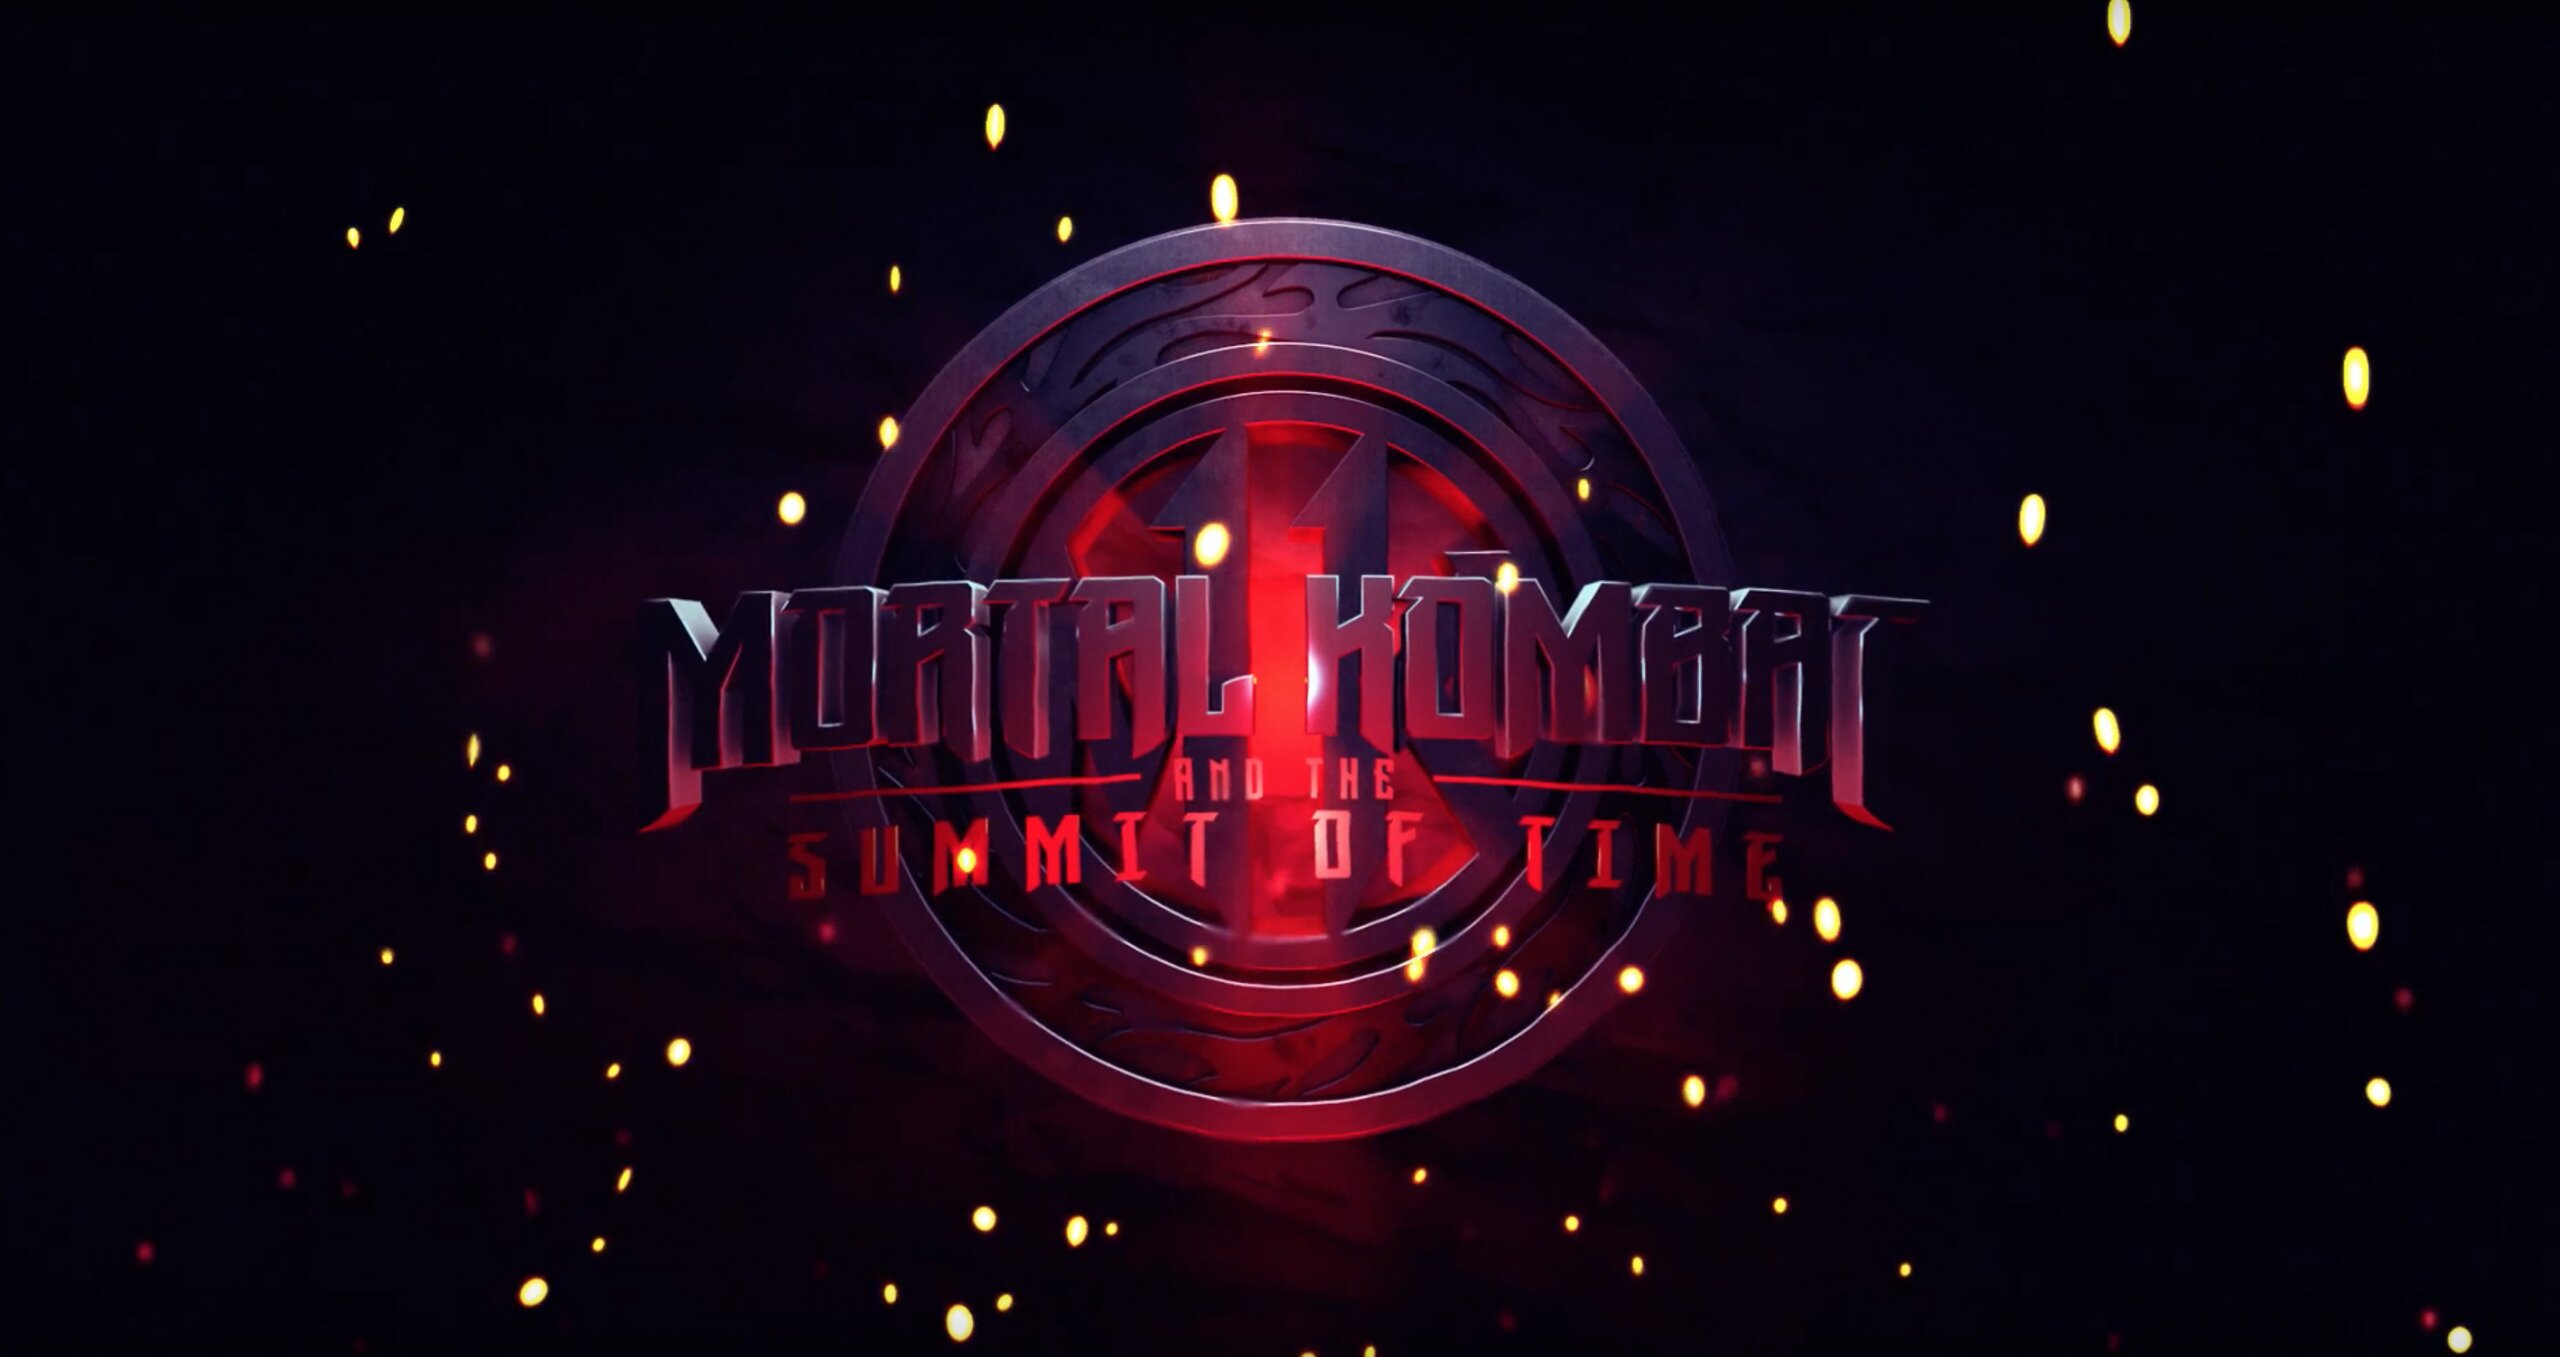 The Summit of Time will see 16 players face-off from May 10-12 in the first major Mortal Kombat 11 tournament since the game's release.